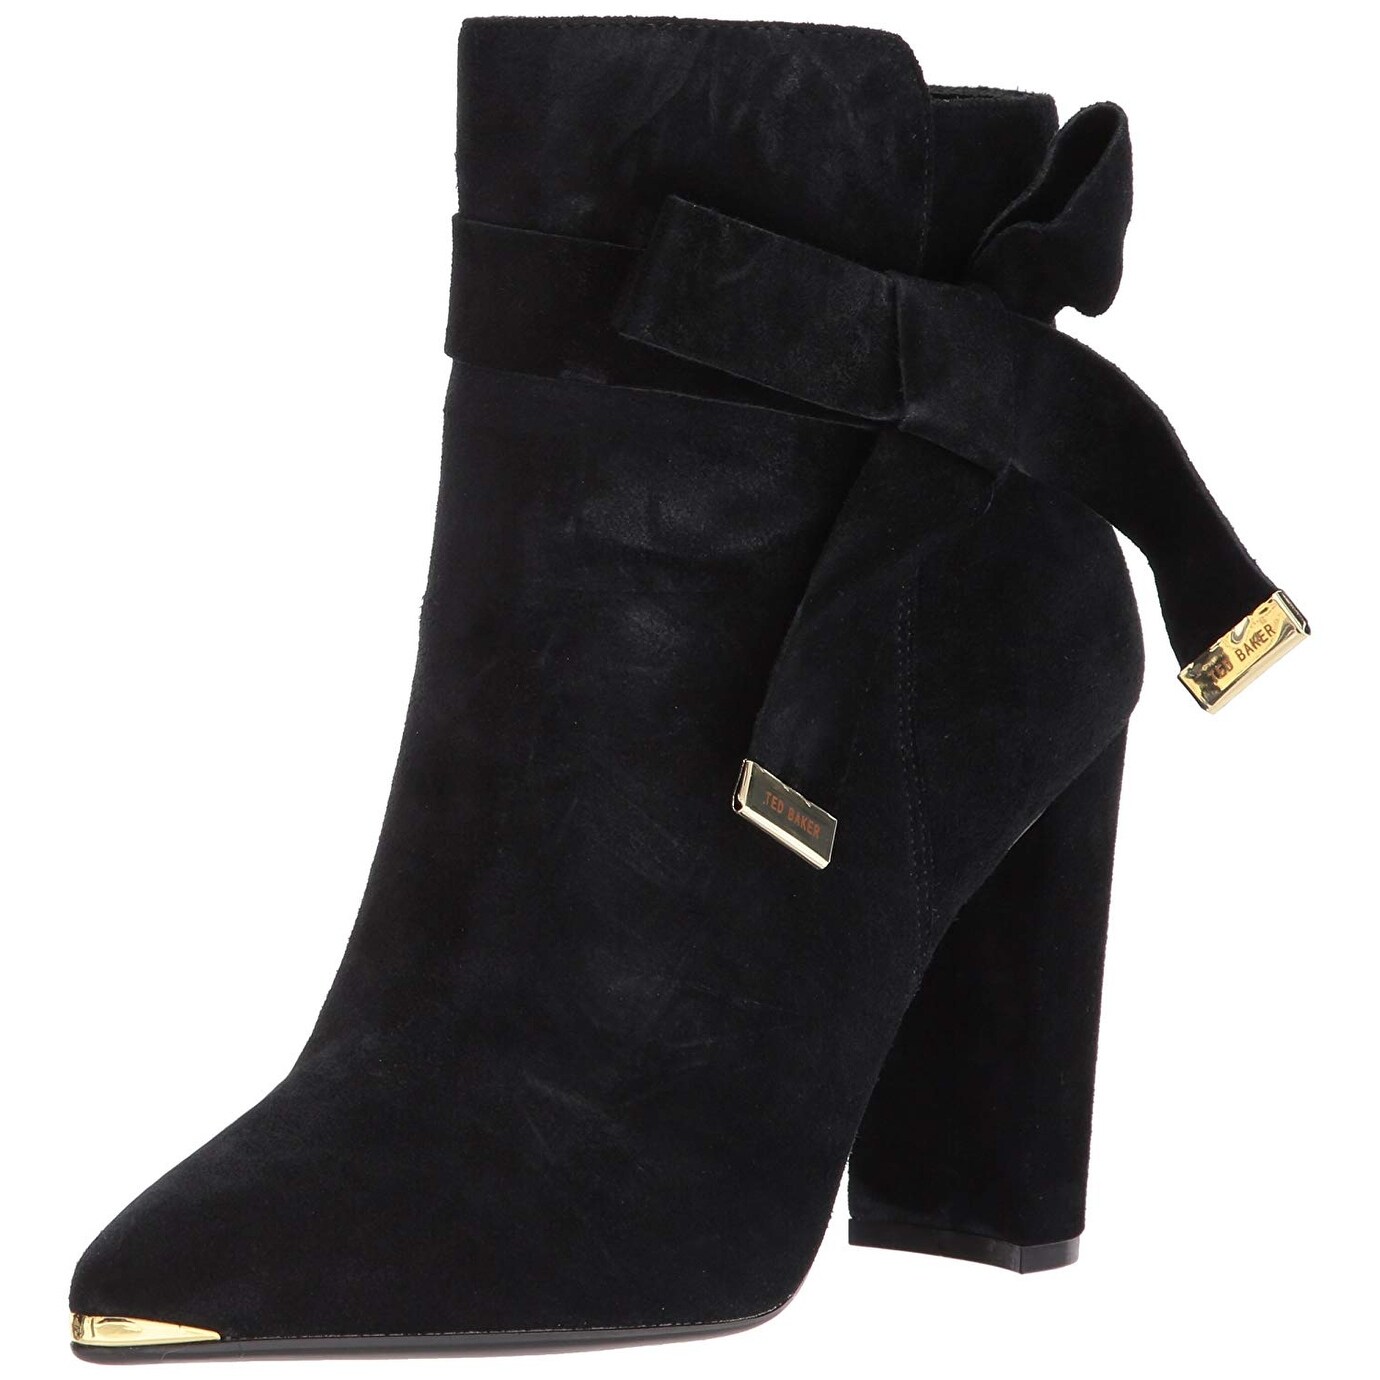 ted baker black suede heeled ankle boots with bow